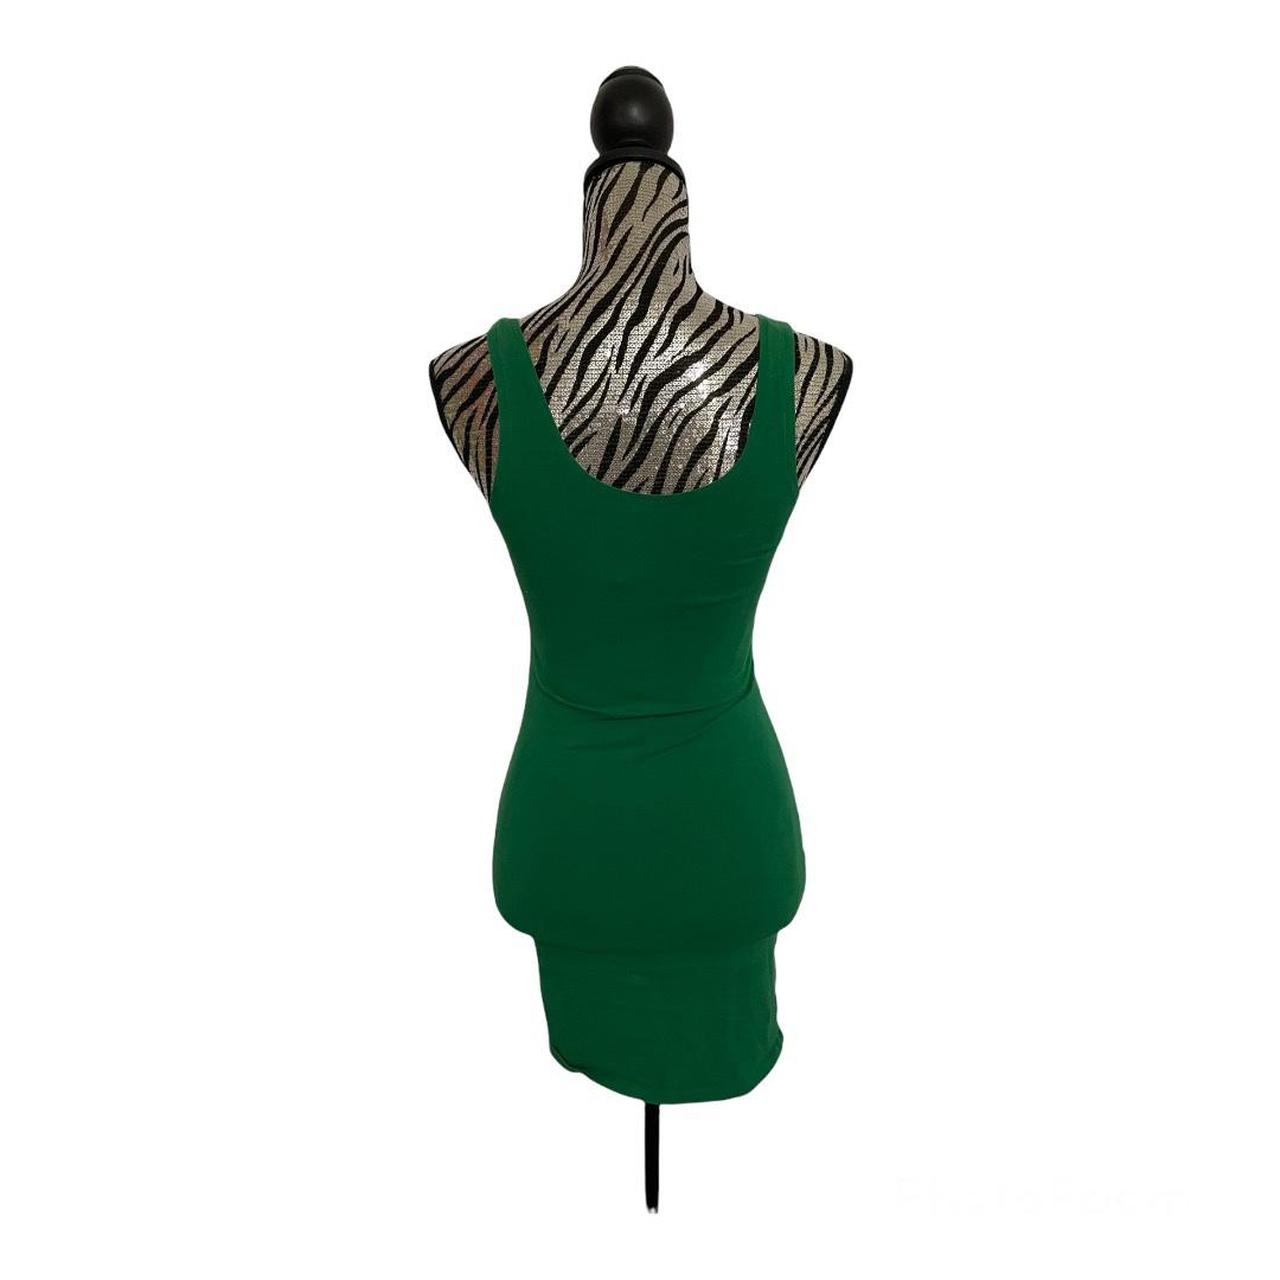 Product Image 2 - Solid color green tank top